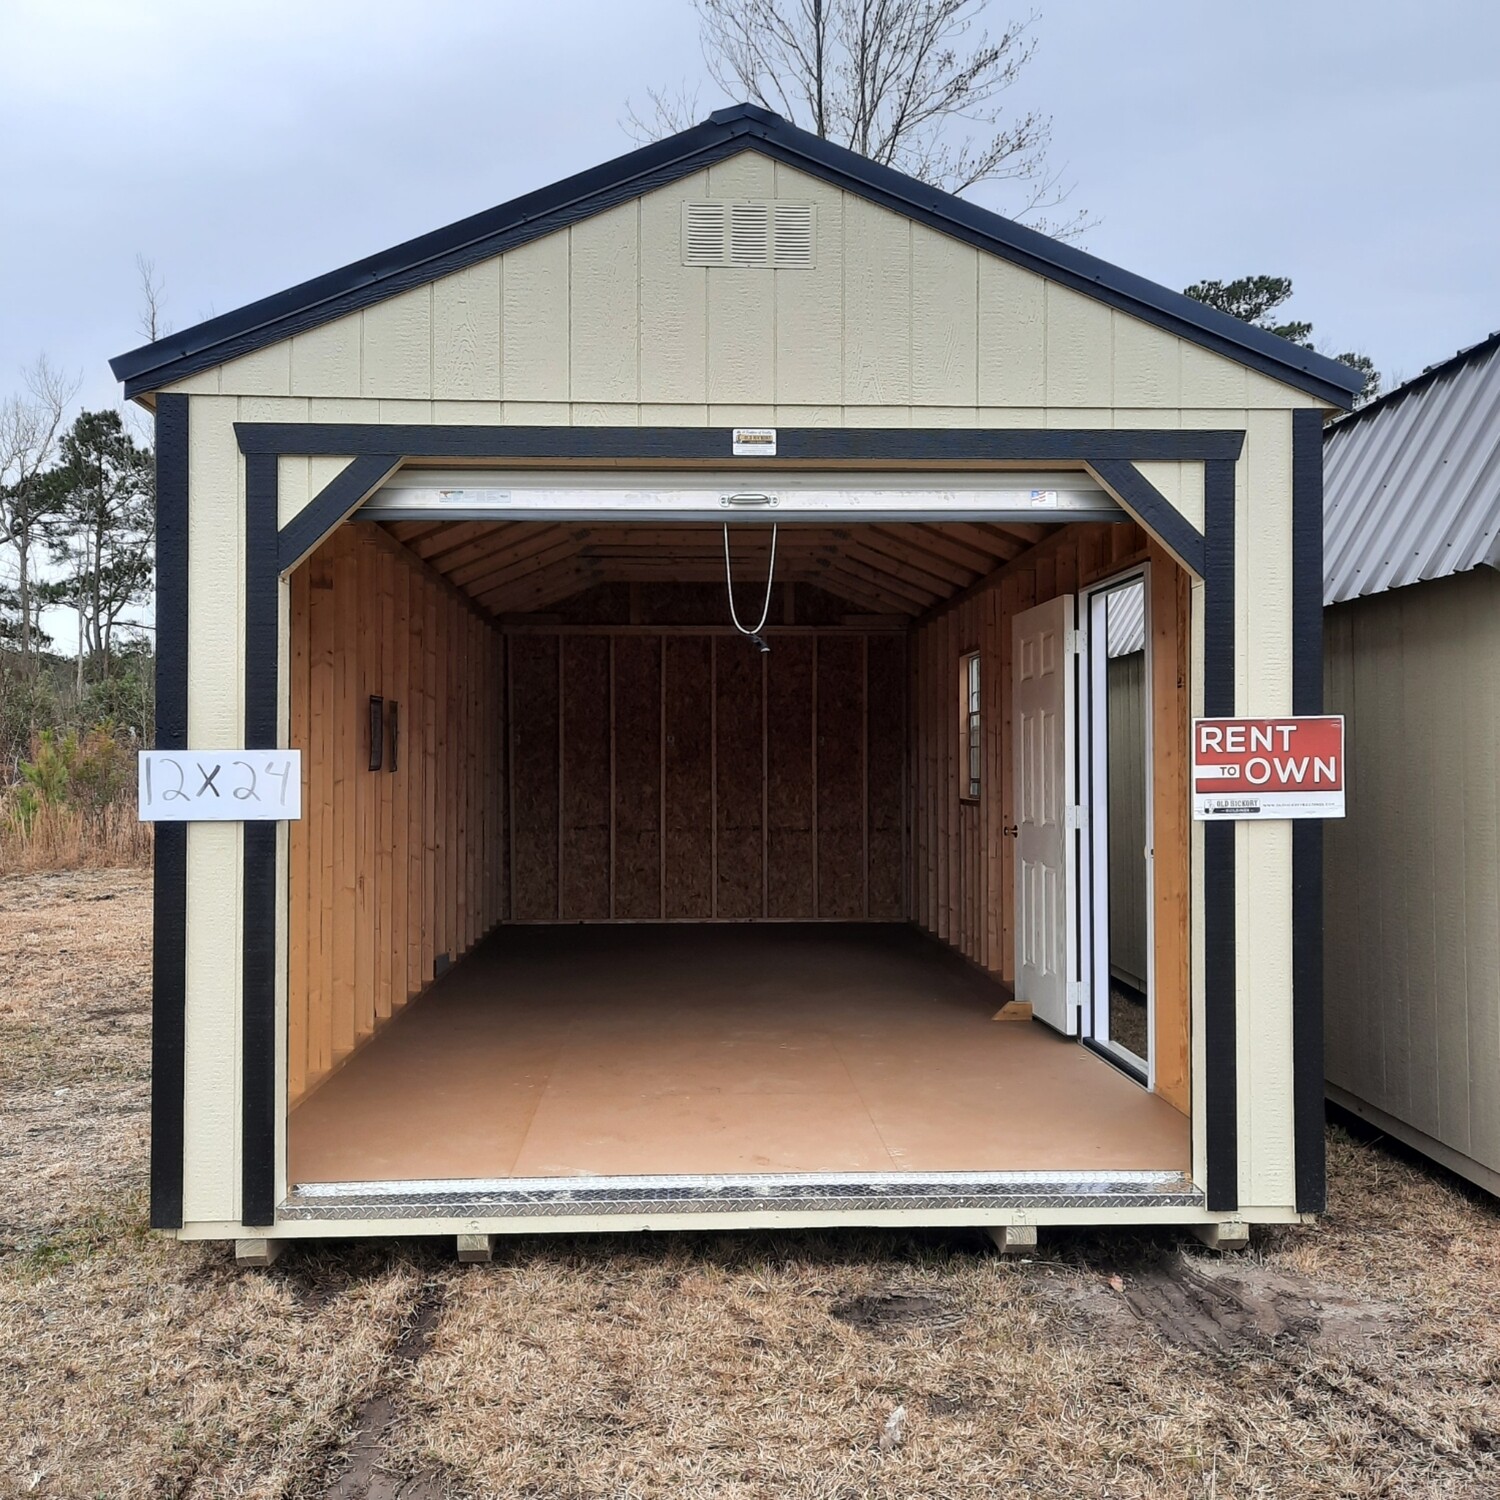 12x24 Utility Shed - Garage Package